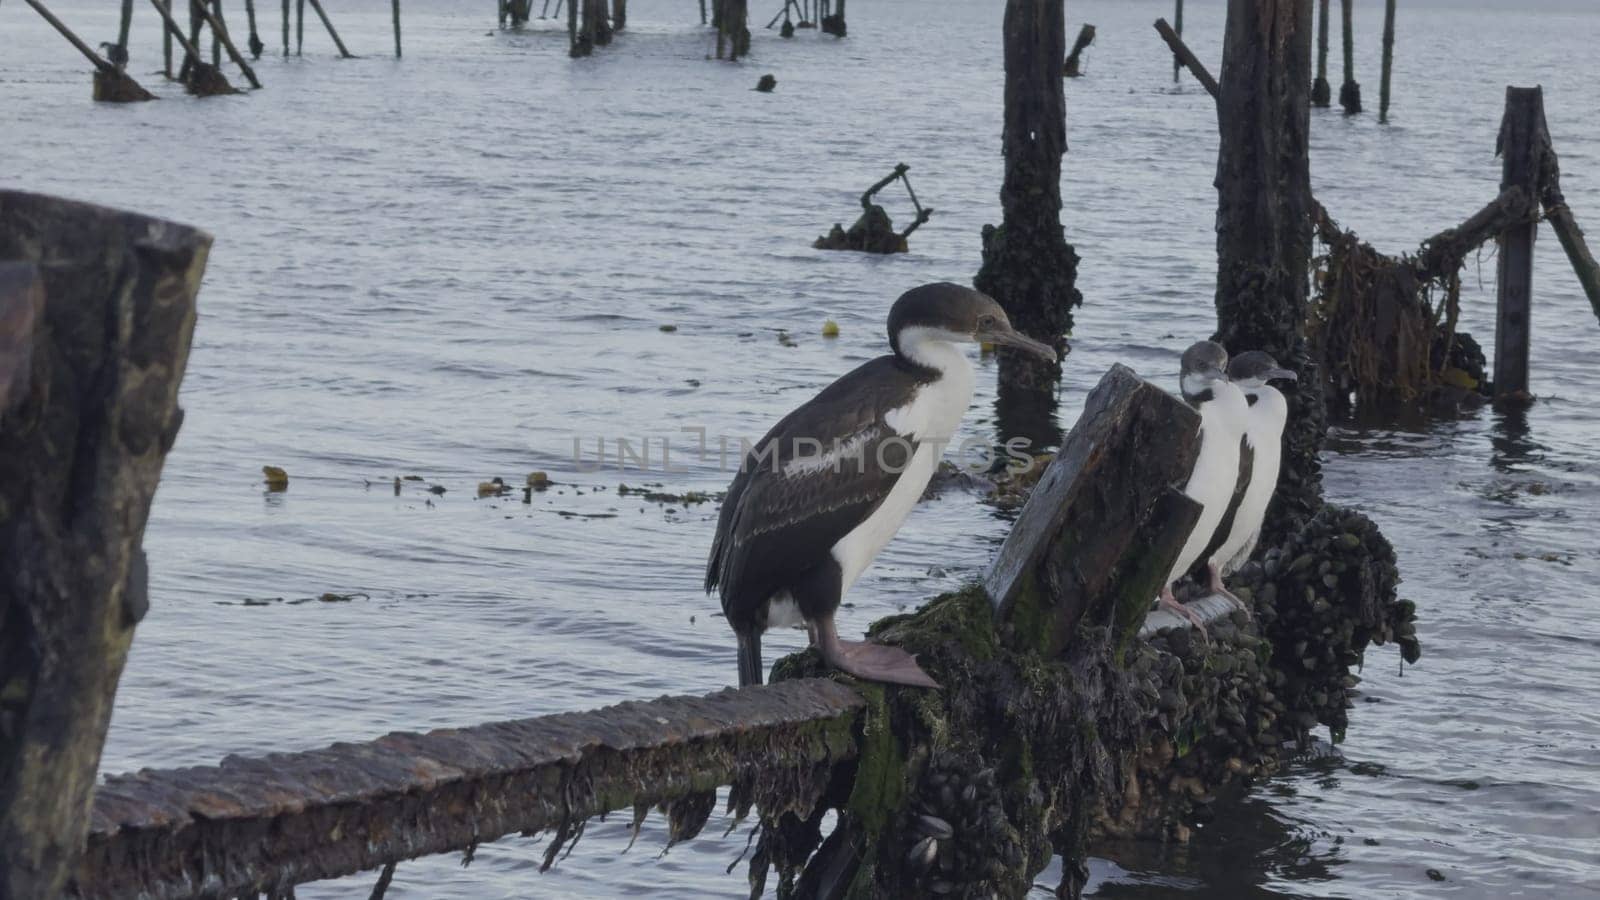 Three emperor cormorants on a decaying pier, one pecking at the wood.